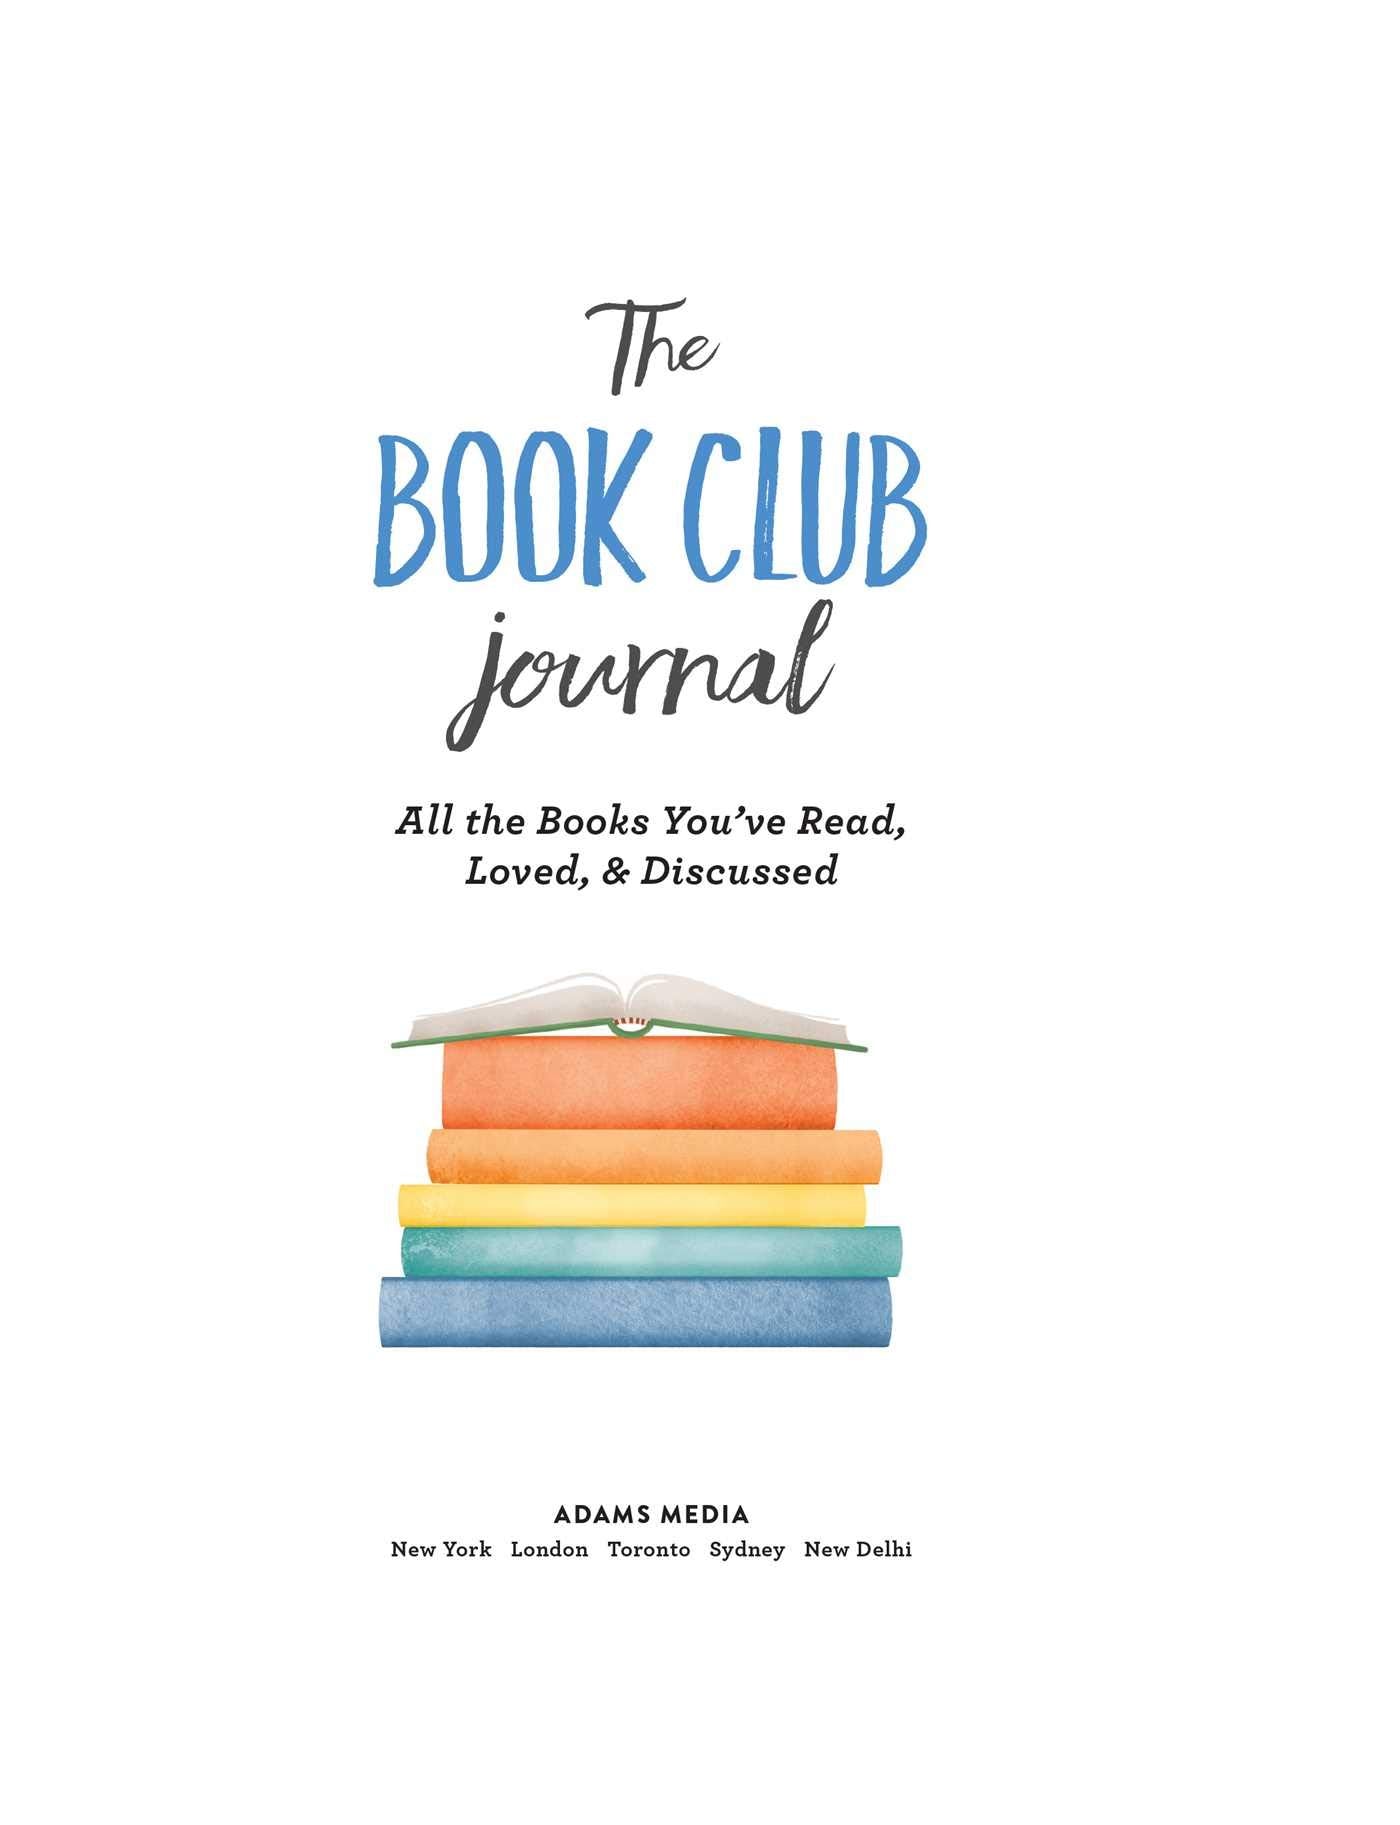 The Book Club Journal: All the Books You've Read, Loved, & Discussed [Book]